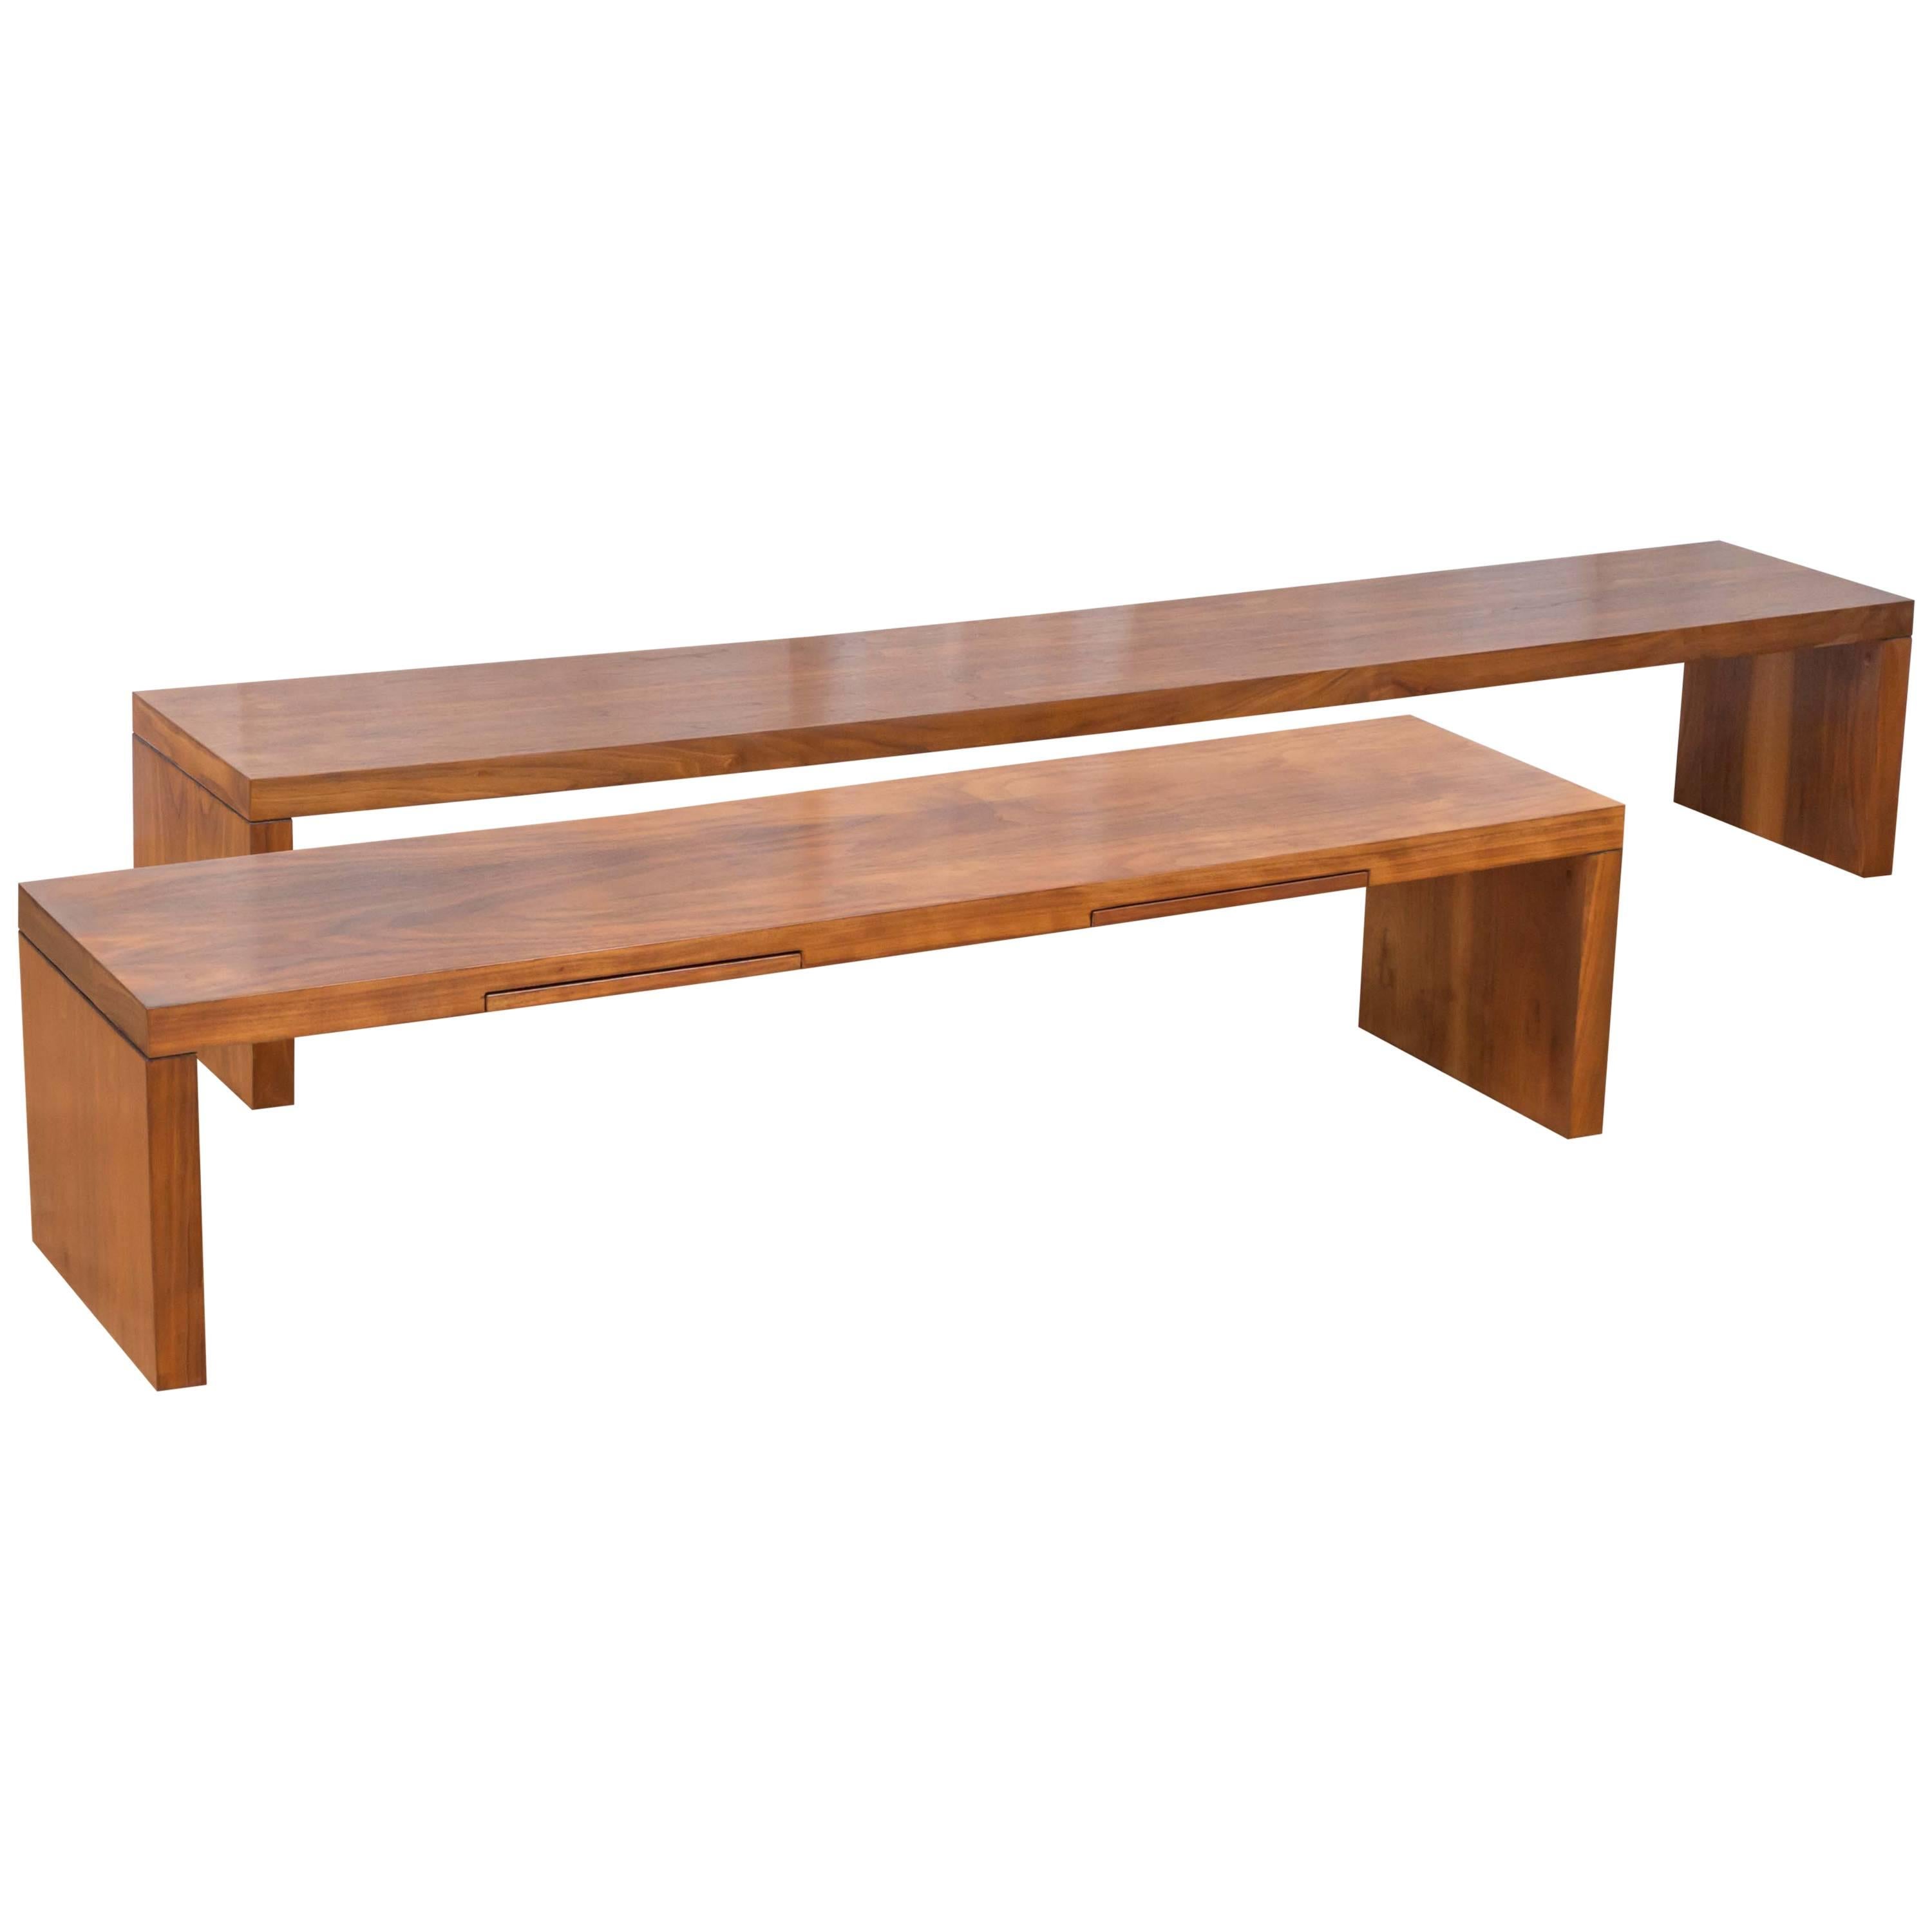 Two of Extra-Long Walnut Benches by Milo Baughman for Thayer Coggin